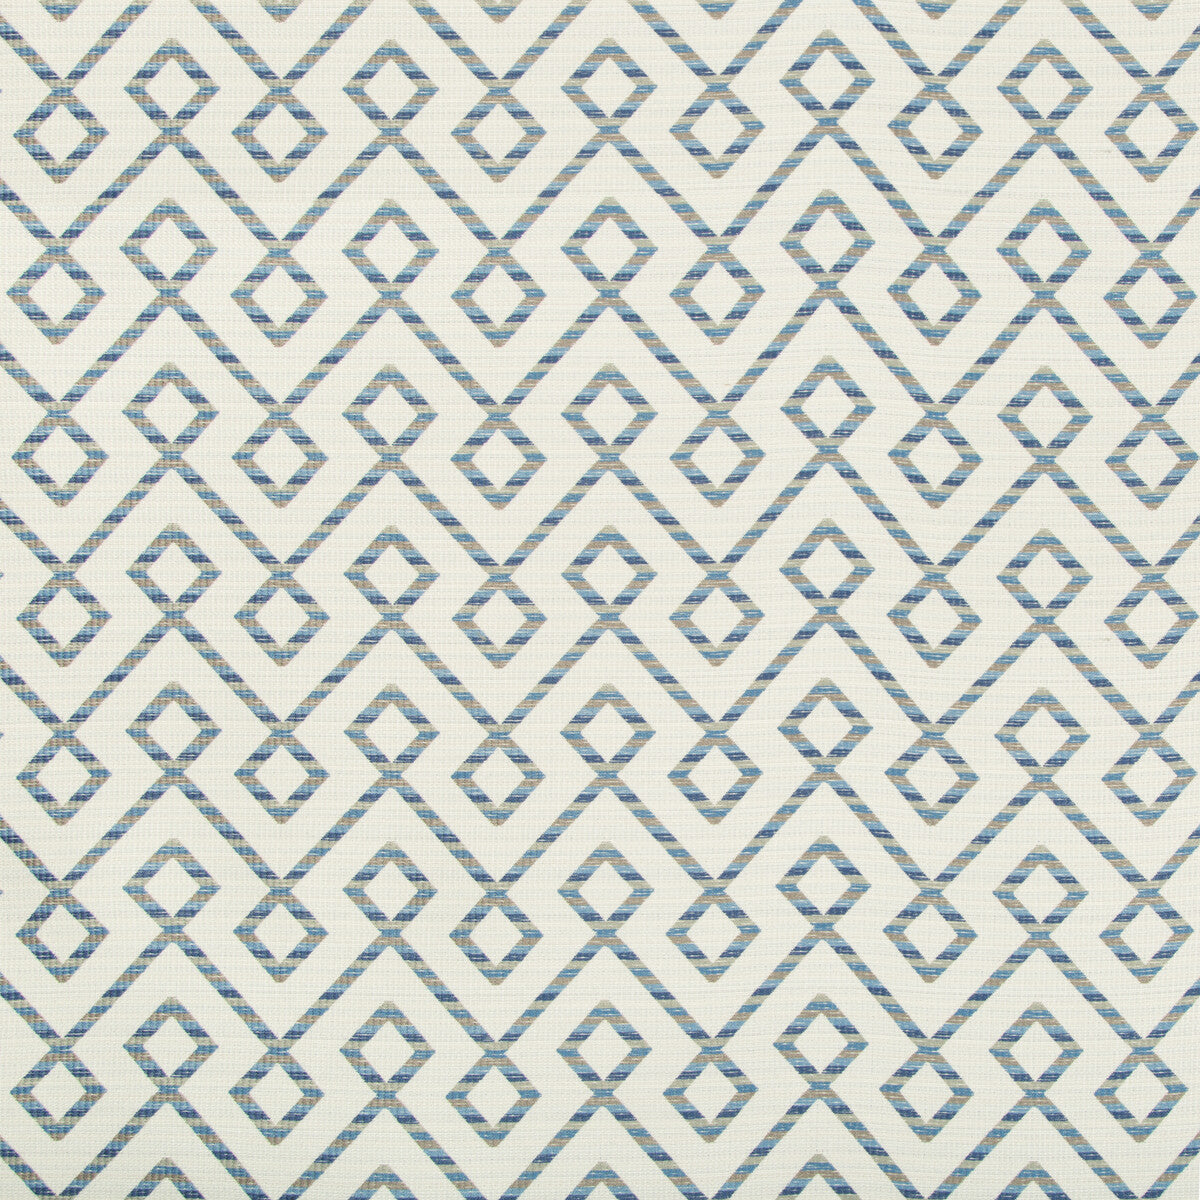 Kravet Design fabric in 34708-511 color - pattern 34708.511.0 - by Kravet Design in the Performance Crypton Home collection